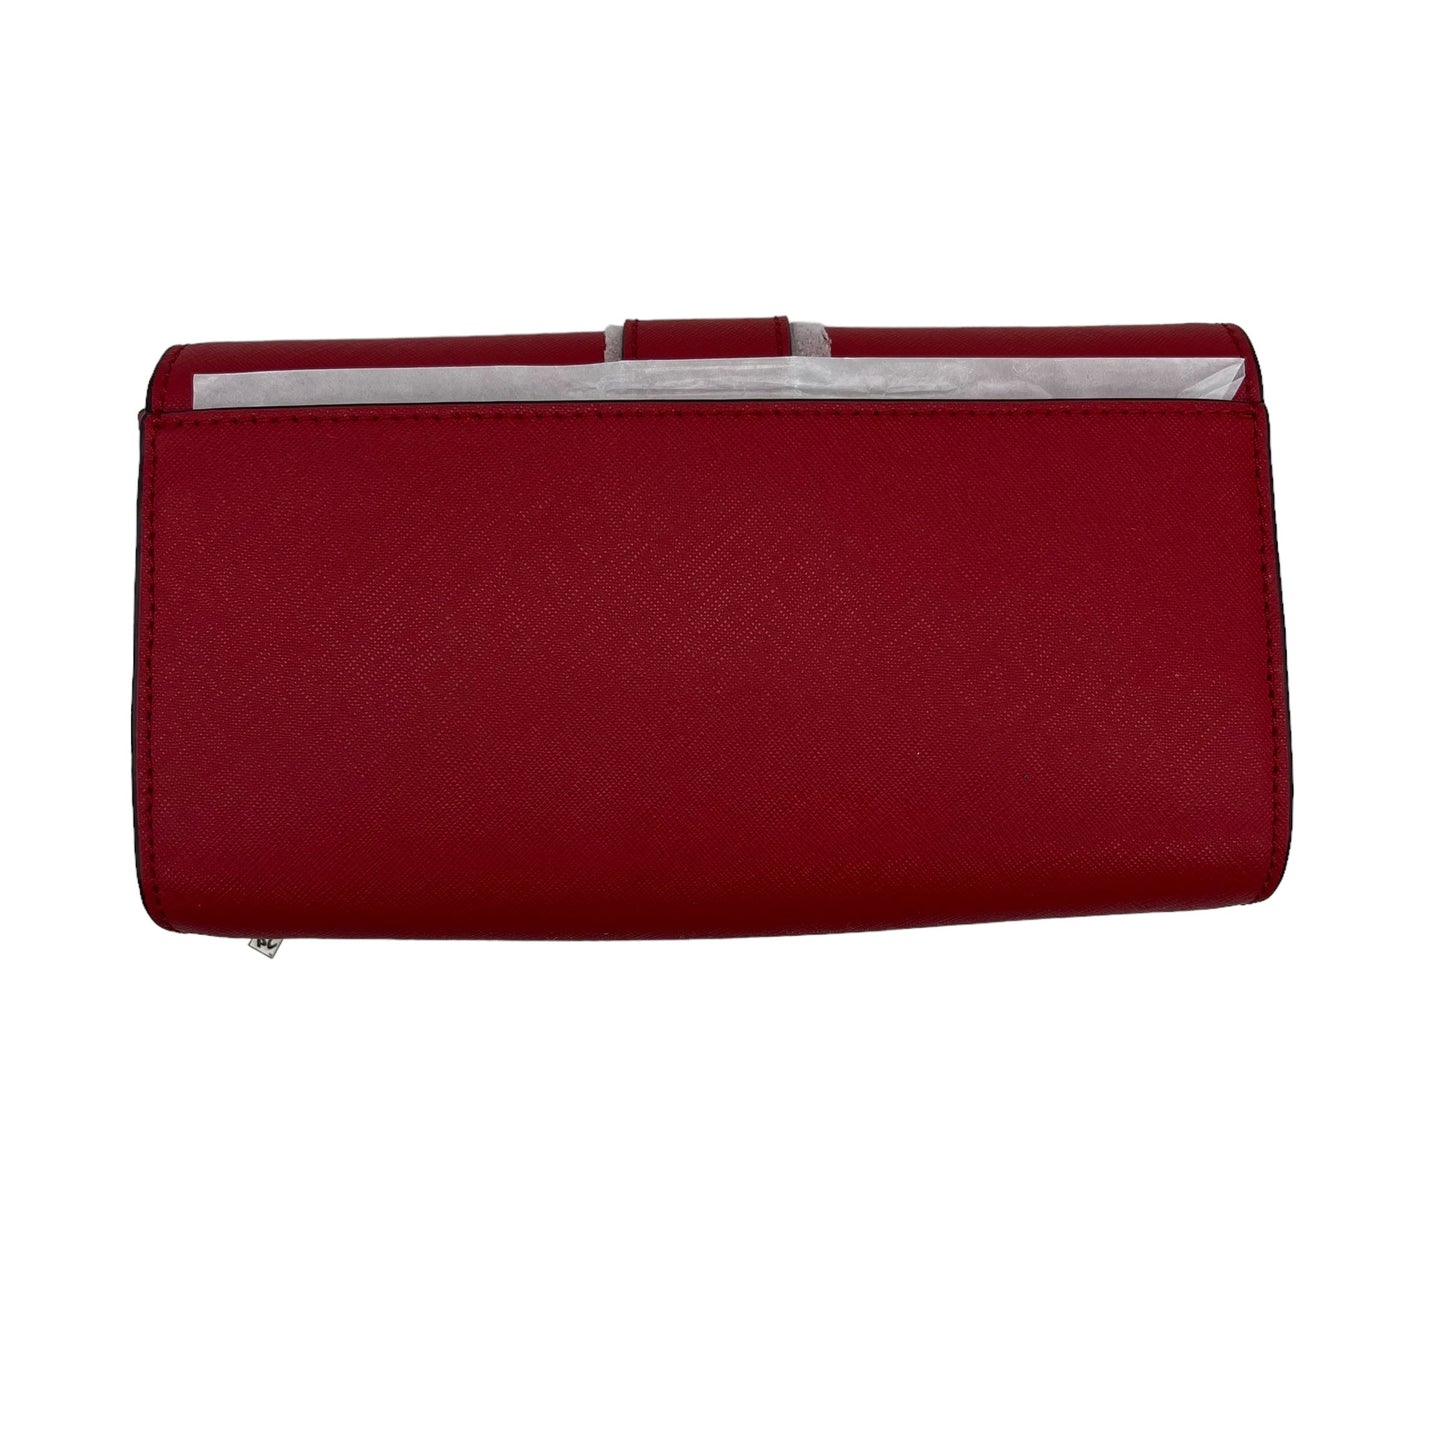 RED CROSSBODY DESIGNER by MICHAEL KORS Size:SMALL